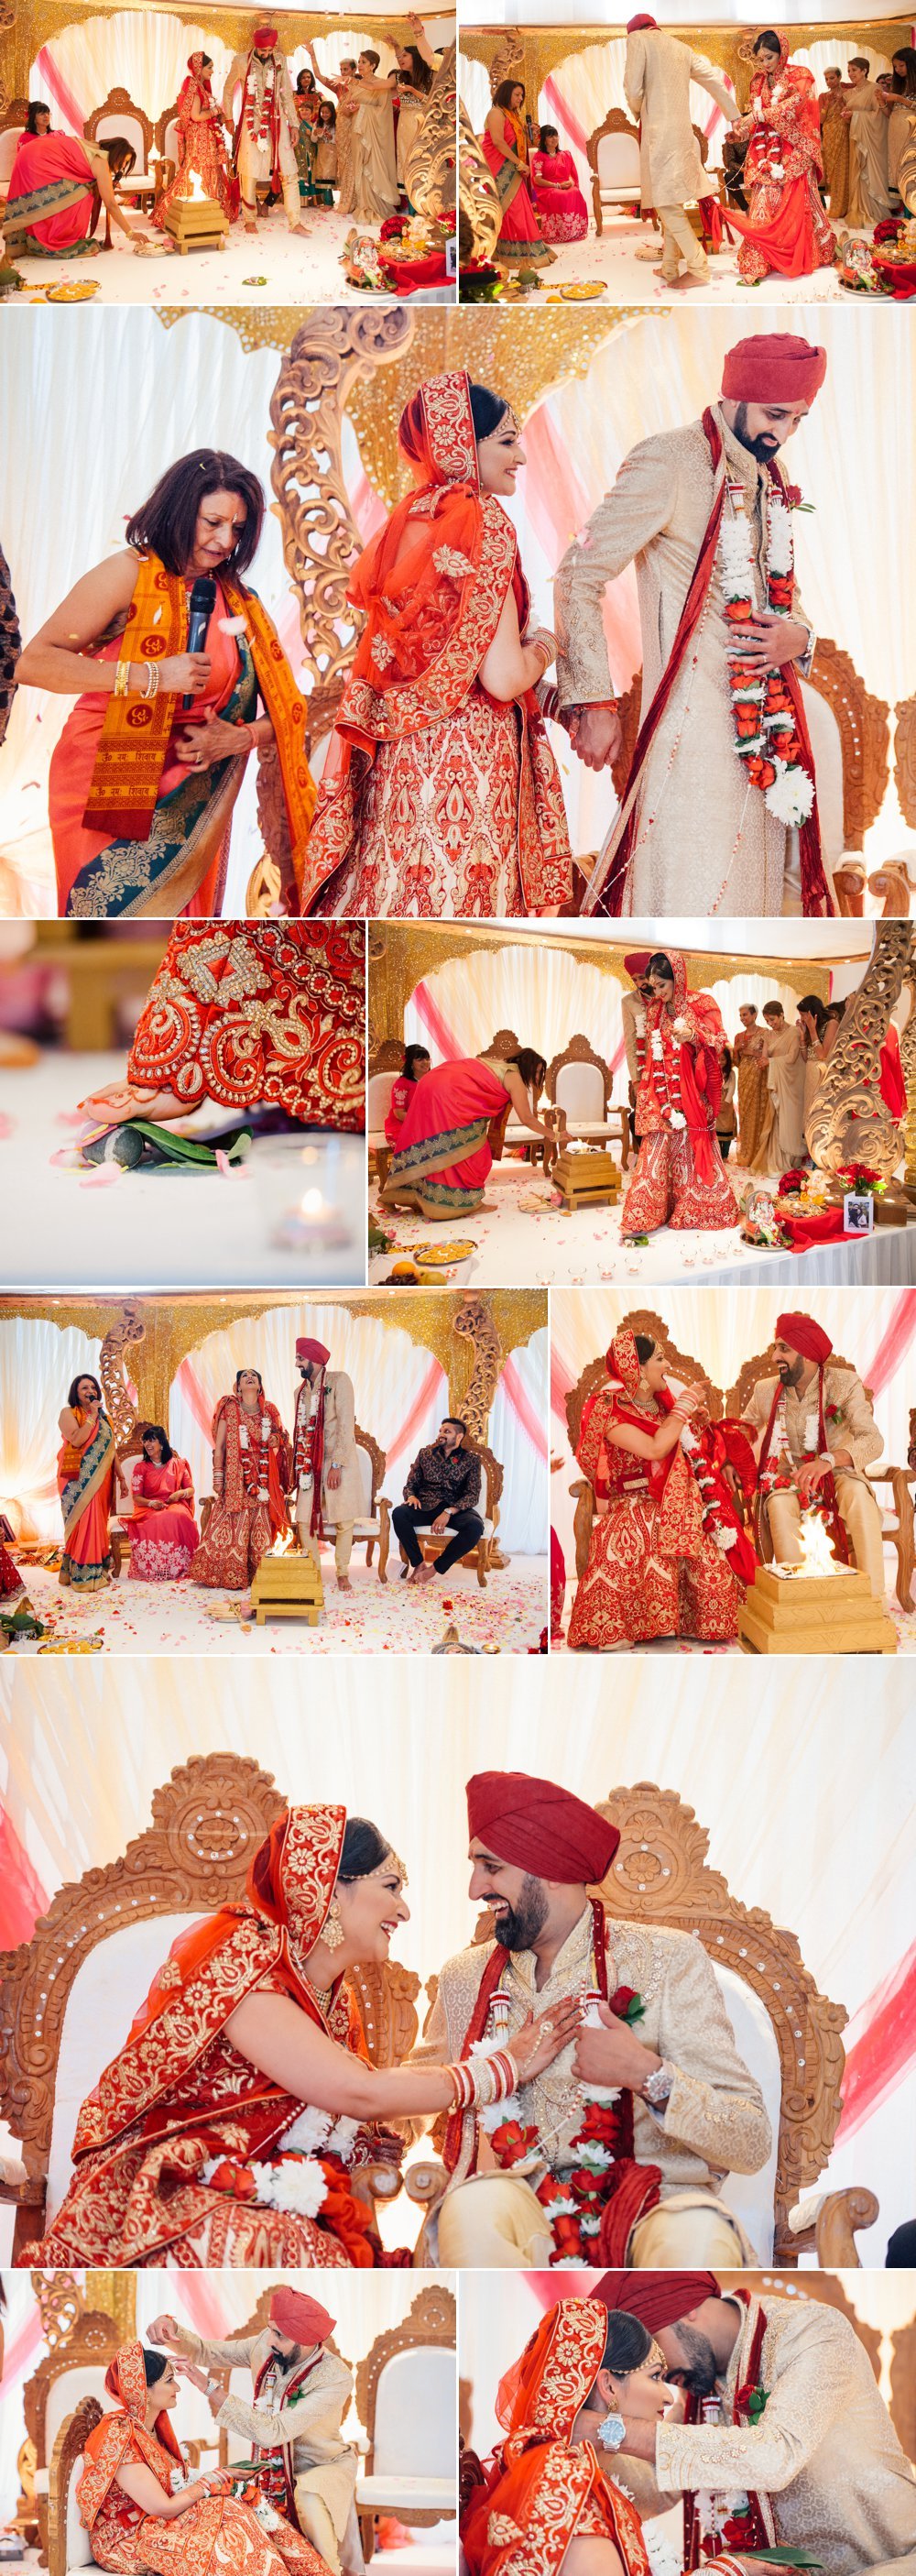 Pittville Pumps Indian Wedding Photography - Image 5